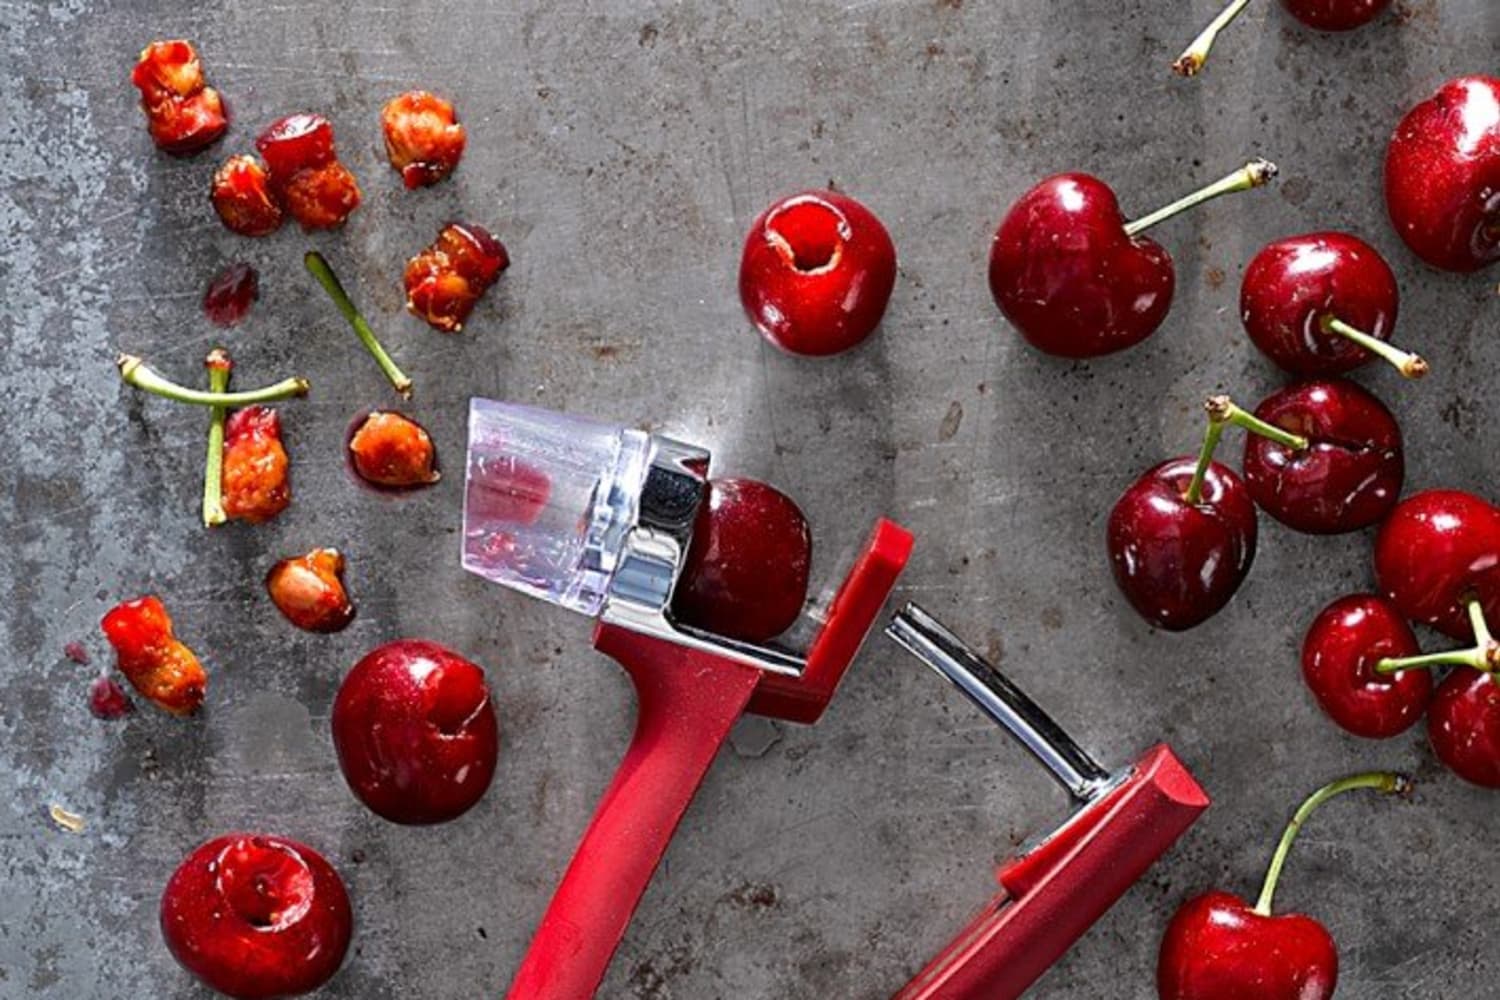 Pitting Cherries Is Messy and Annoying. This Simple OXO Kitchen